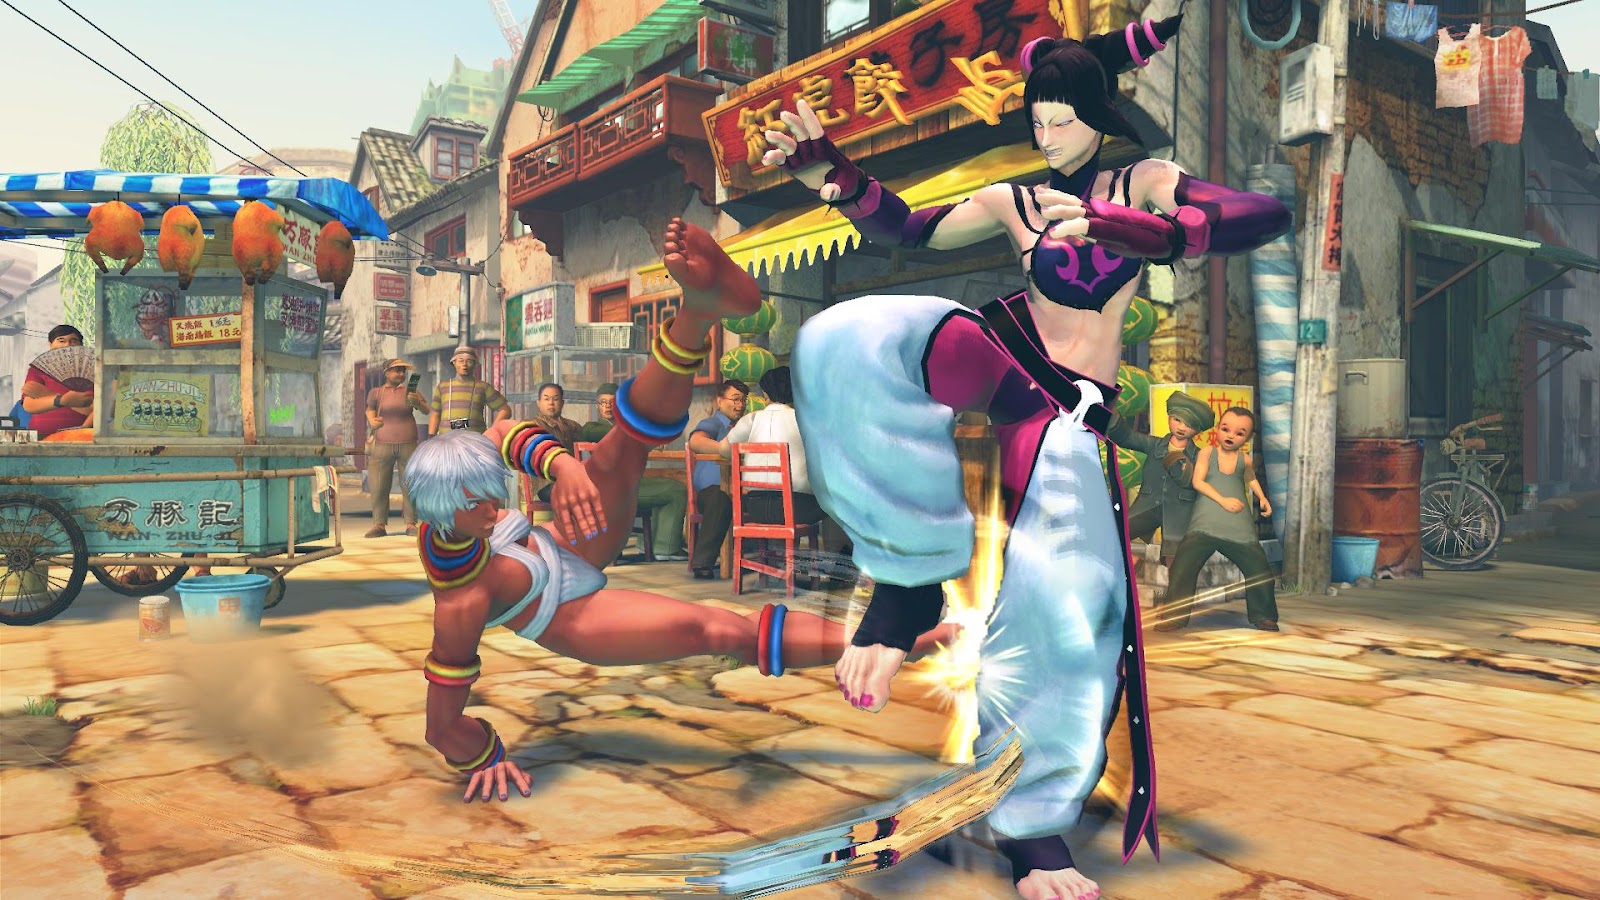 Should Capcom use a Street Fighter 4 original character as Street